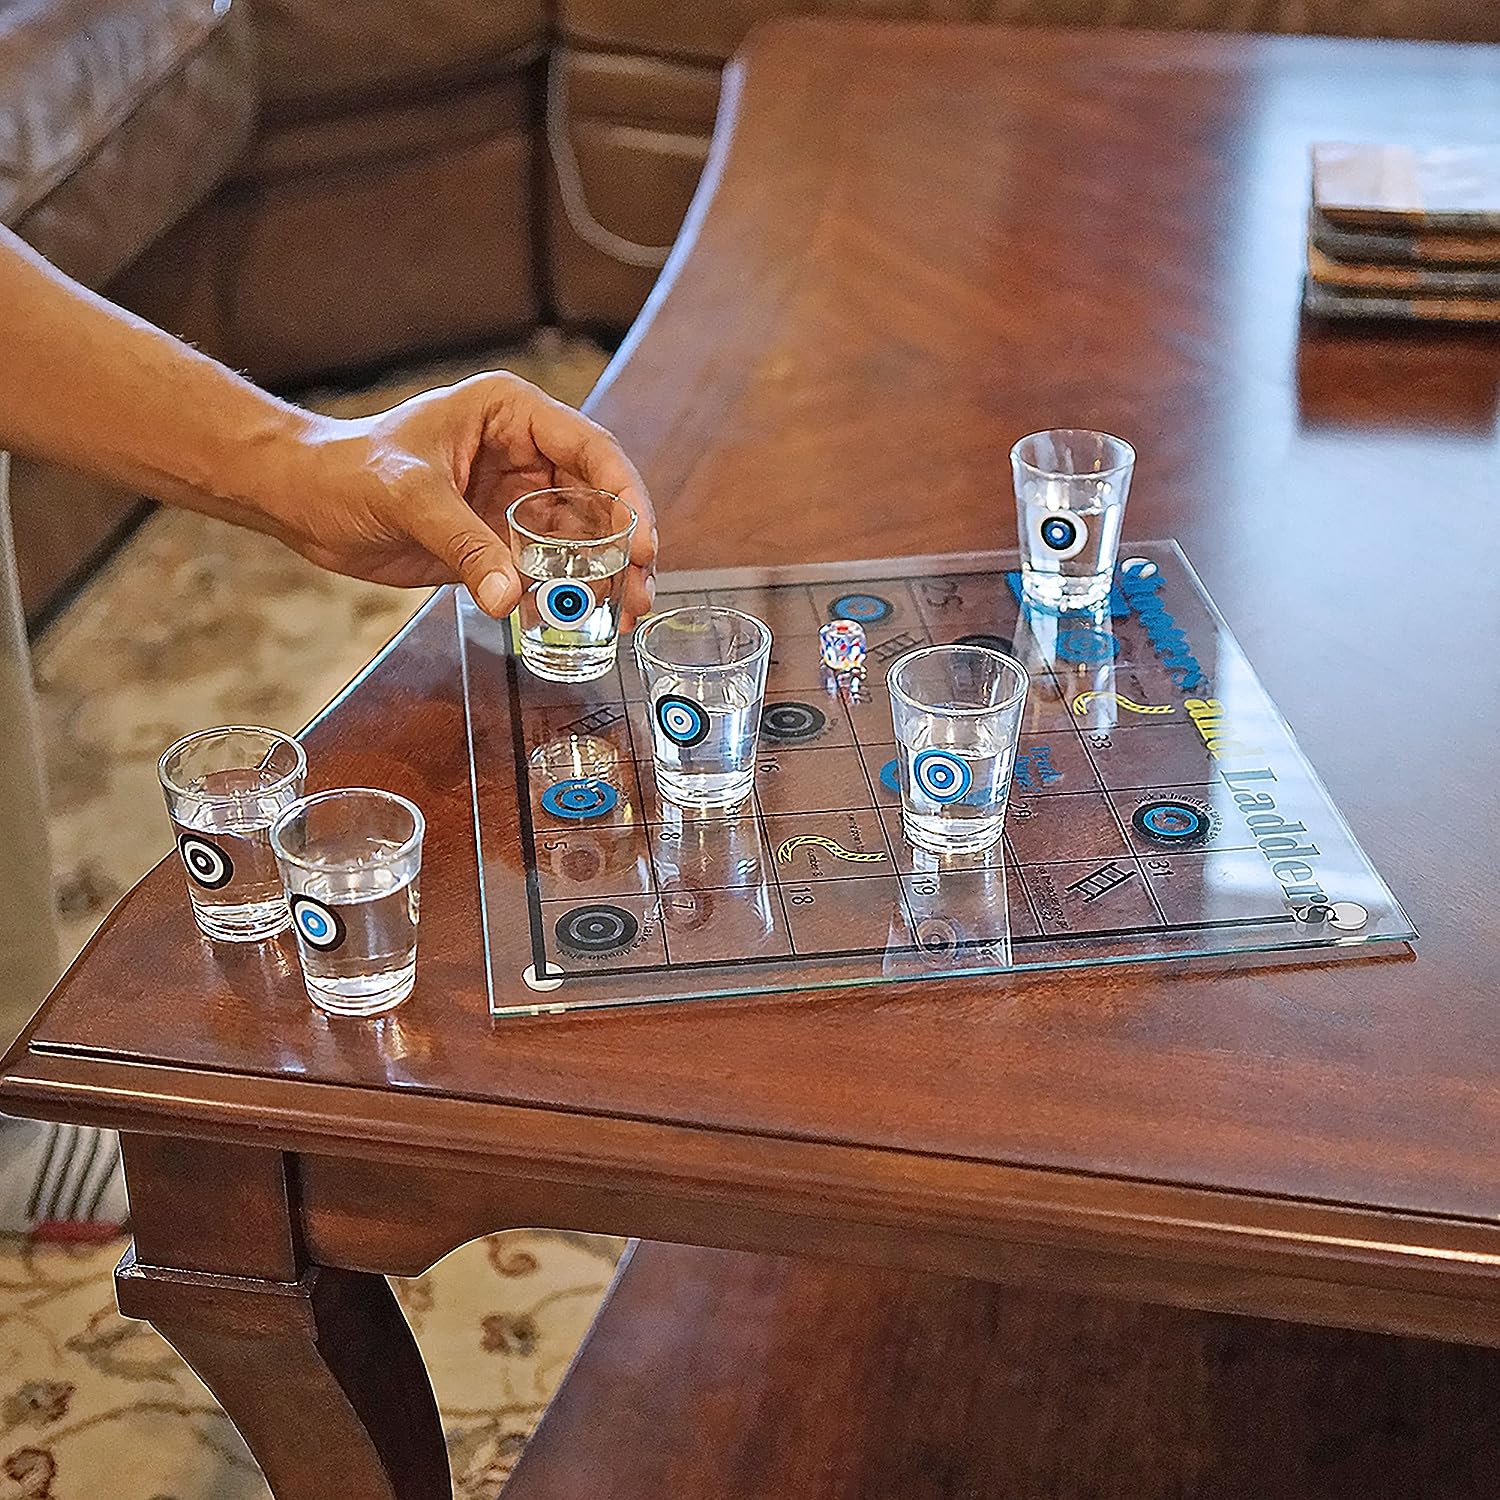 Shooters & Ladders Shot Glass Drinking Game